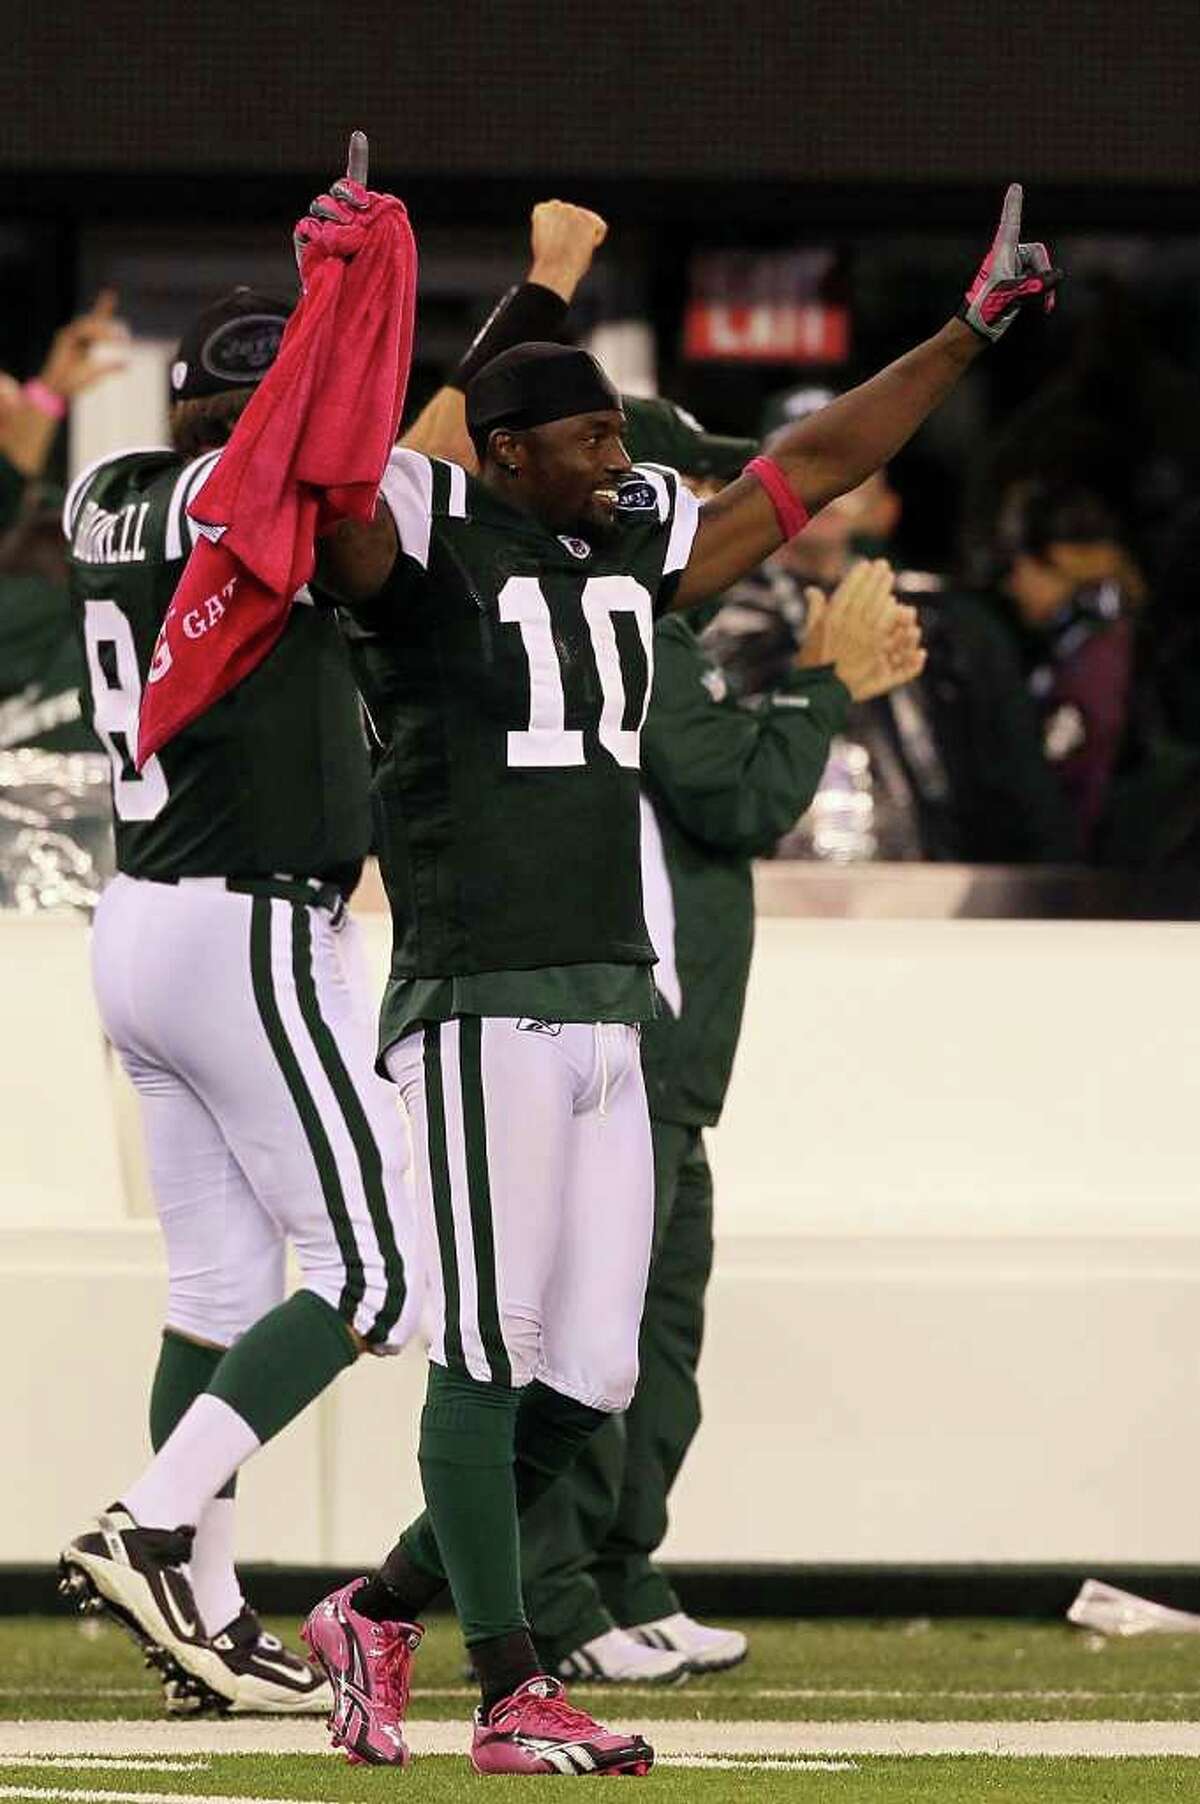 EAST RUTHERFORD, NJ - OCTOBER 11: Santonio Holmes #10 of the New York Jets celebrates as Dwight Lowery #26 scored on a 26-yard interception return for a touchdown in the fourth quarter against the Minnesota Vikings at New Meadowlands Stadium on October 11, 2010 in East Rutherford, New Jersey. (Photo by Jim McIsaac/Getty Images) *** Local Caption *** Santonio Holmes